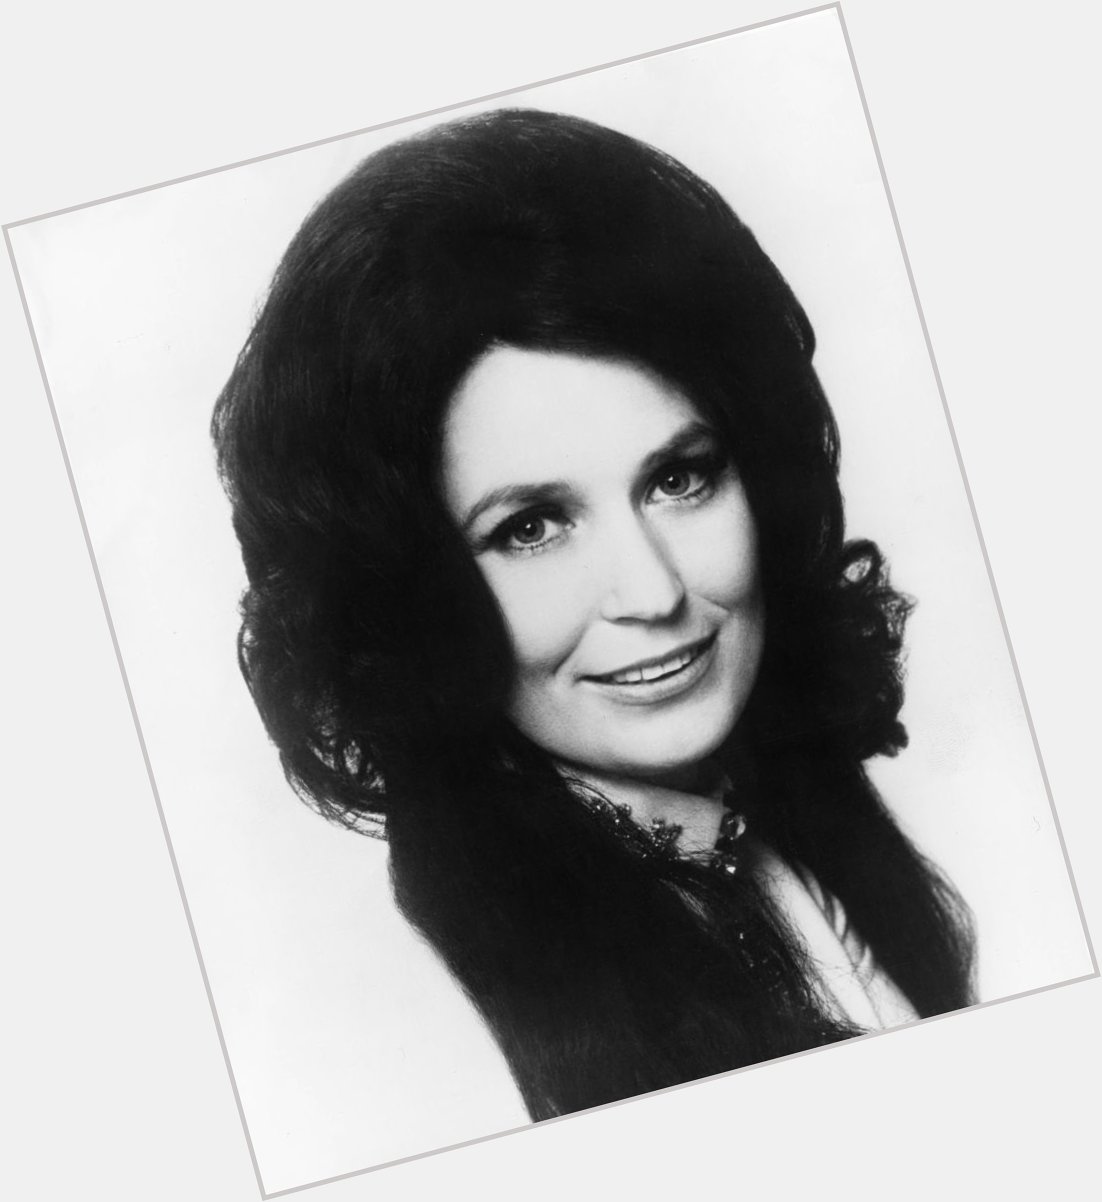 Happy Birthday to my big sister and the Queen of Country Music, Loretta Lynn! Love you!! 